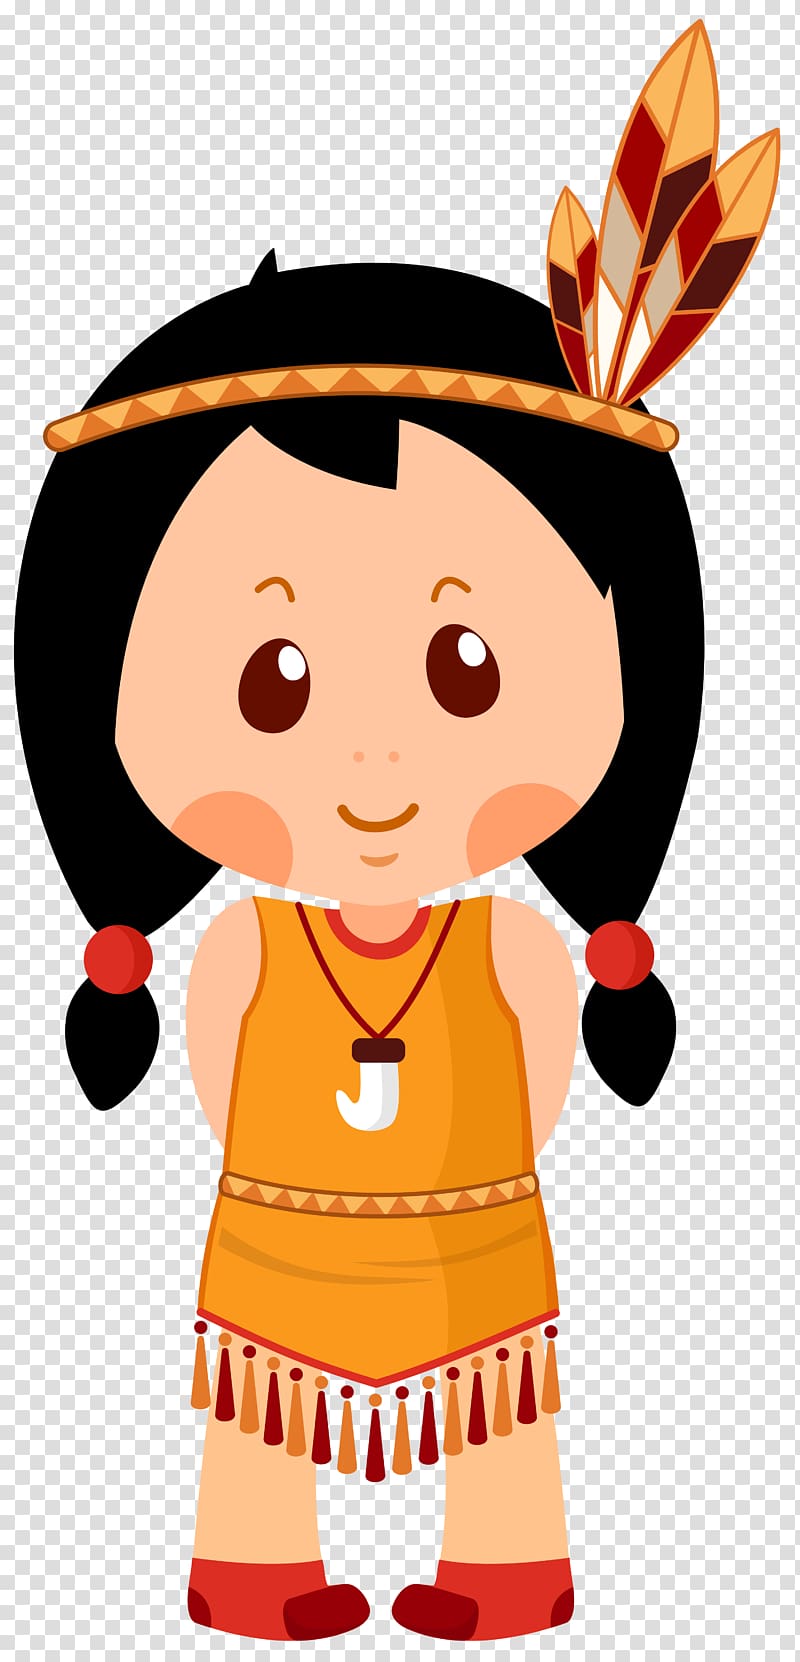 native American , Native Americans in the United States Girl , Native American Girl Clipar transparent background PNG clipart